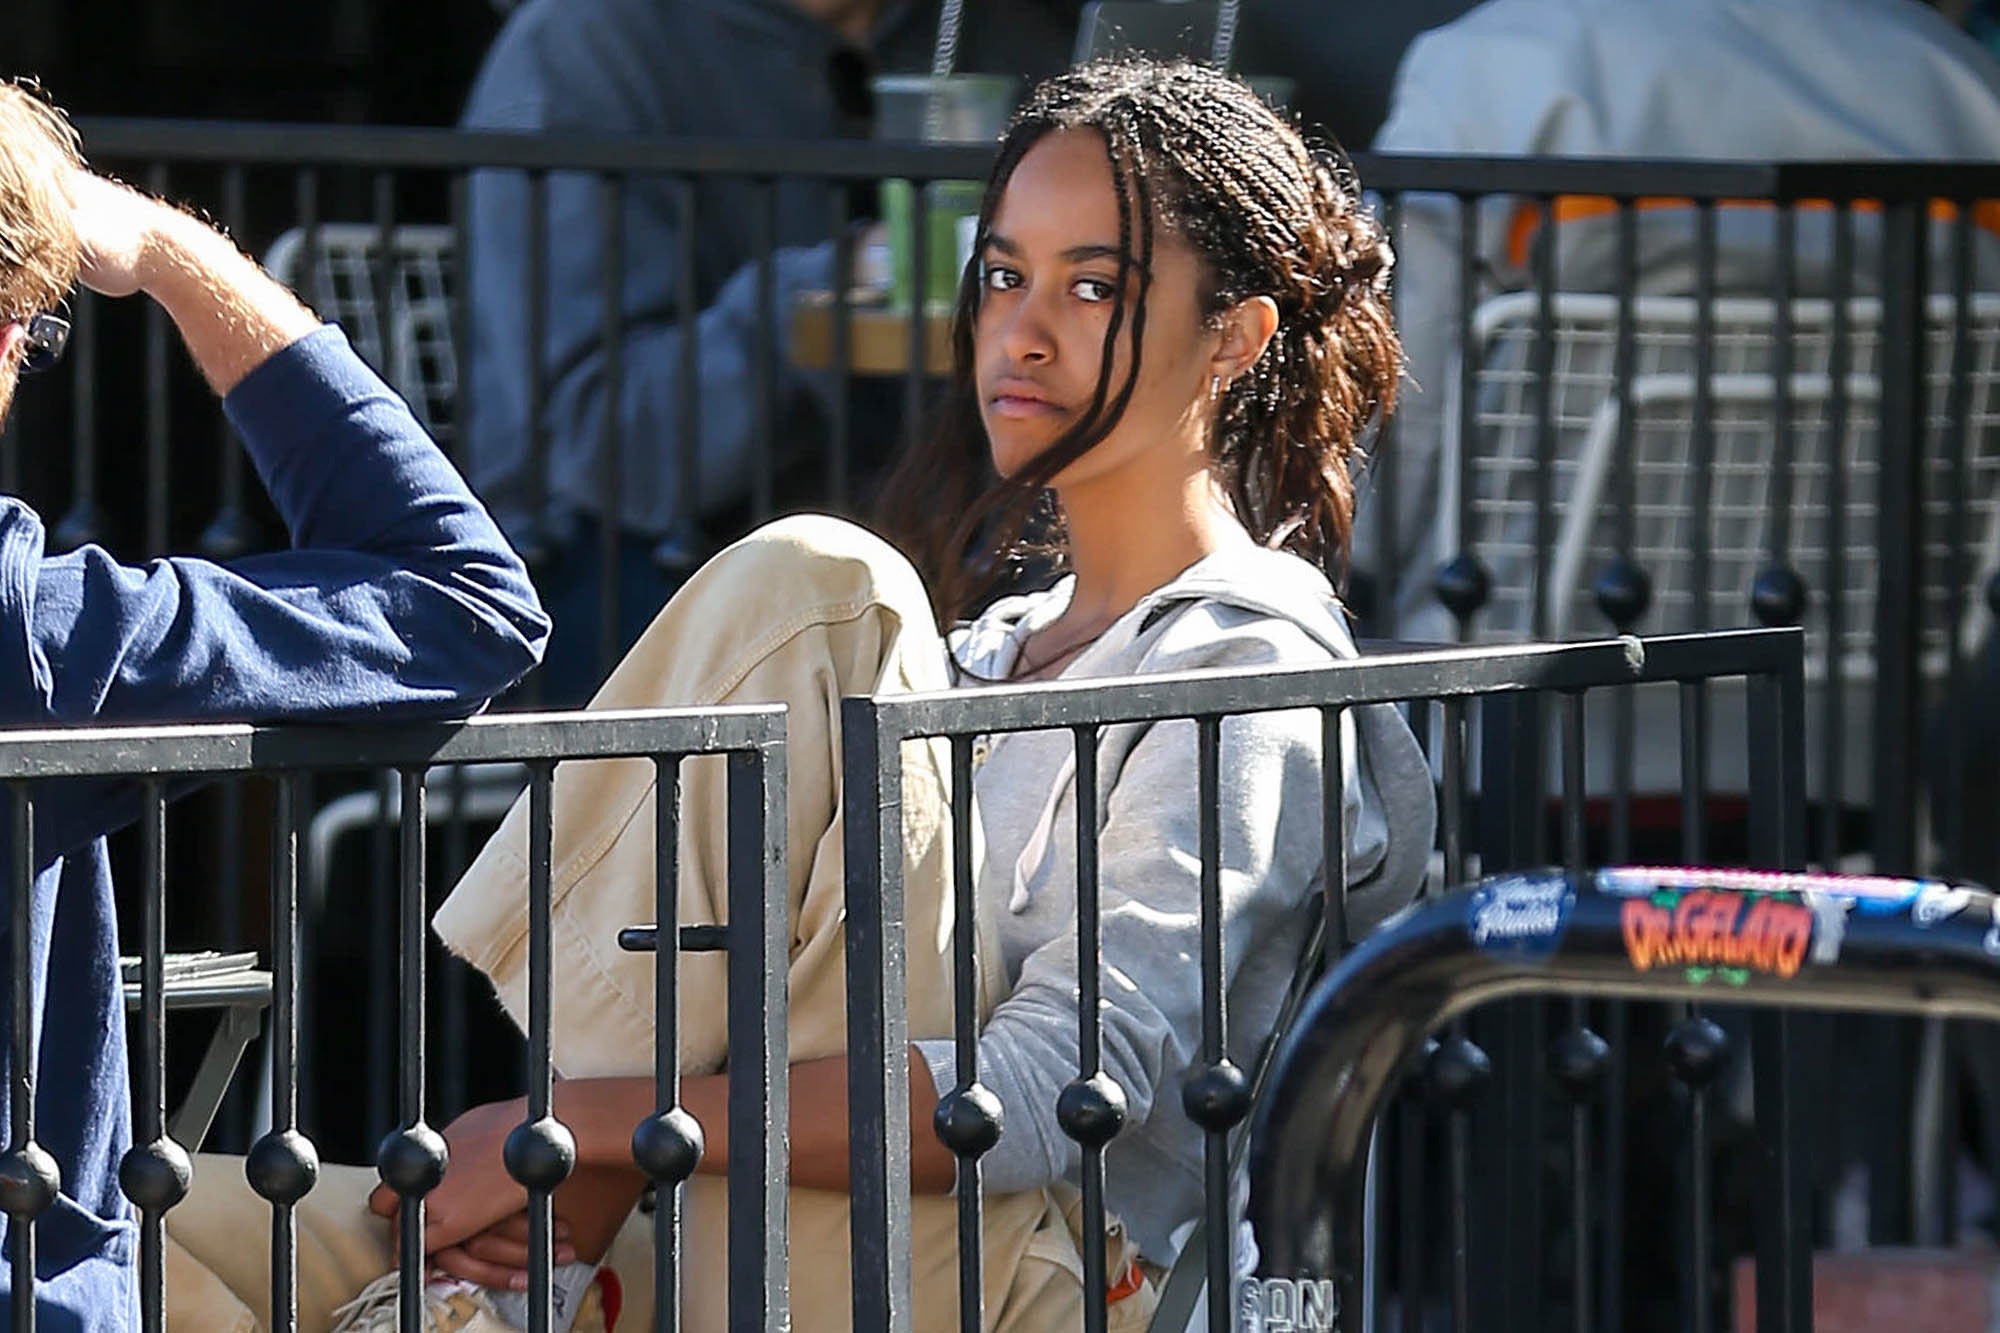 The Transformation Of Malia Obama From 6 To 25 Years Old